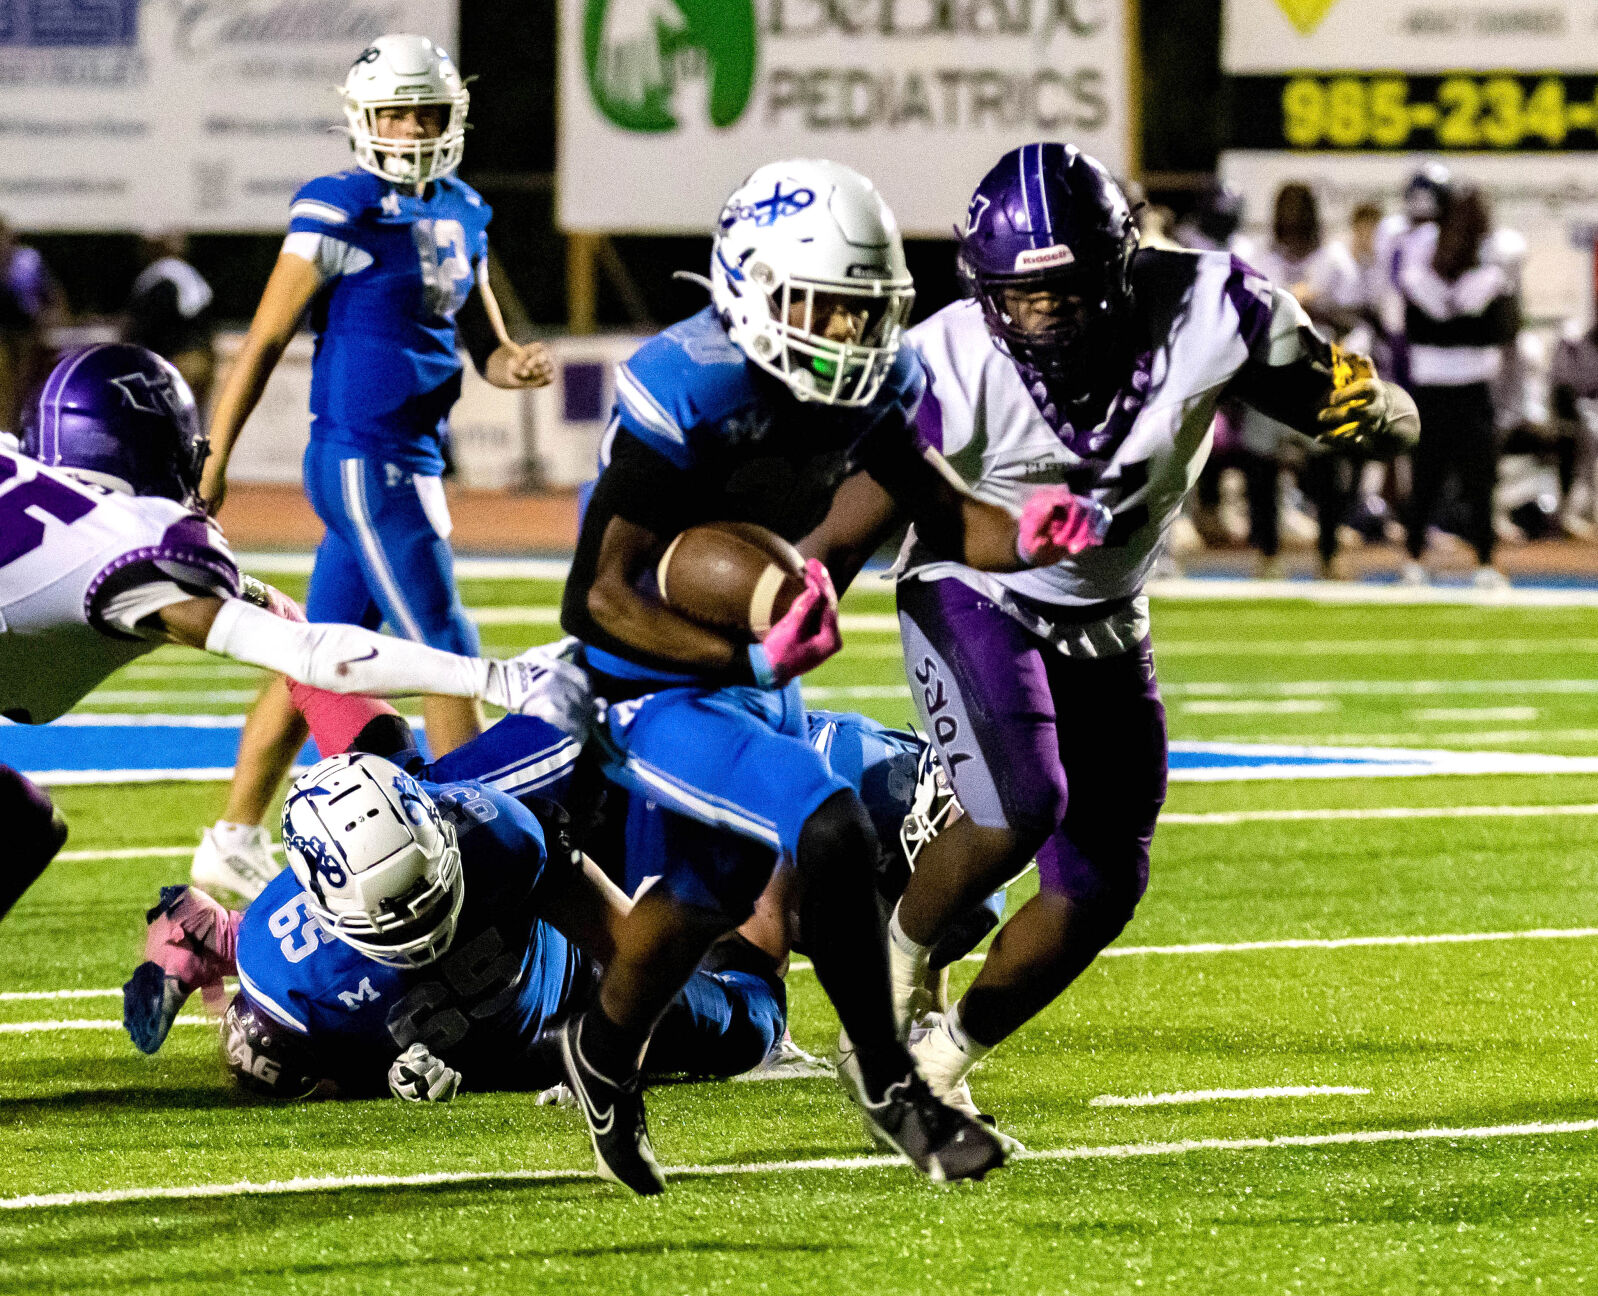 Vote for the Northshore Player of the Week in Week 9 of High School Football